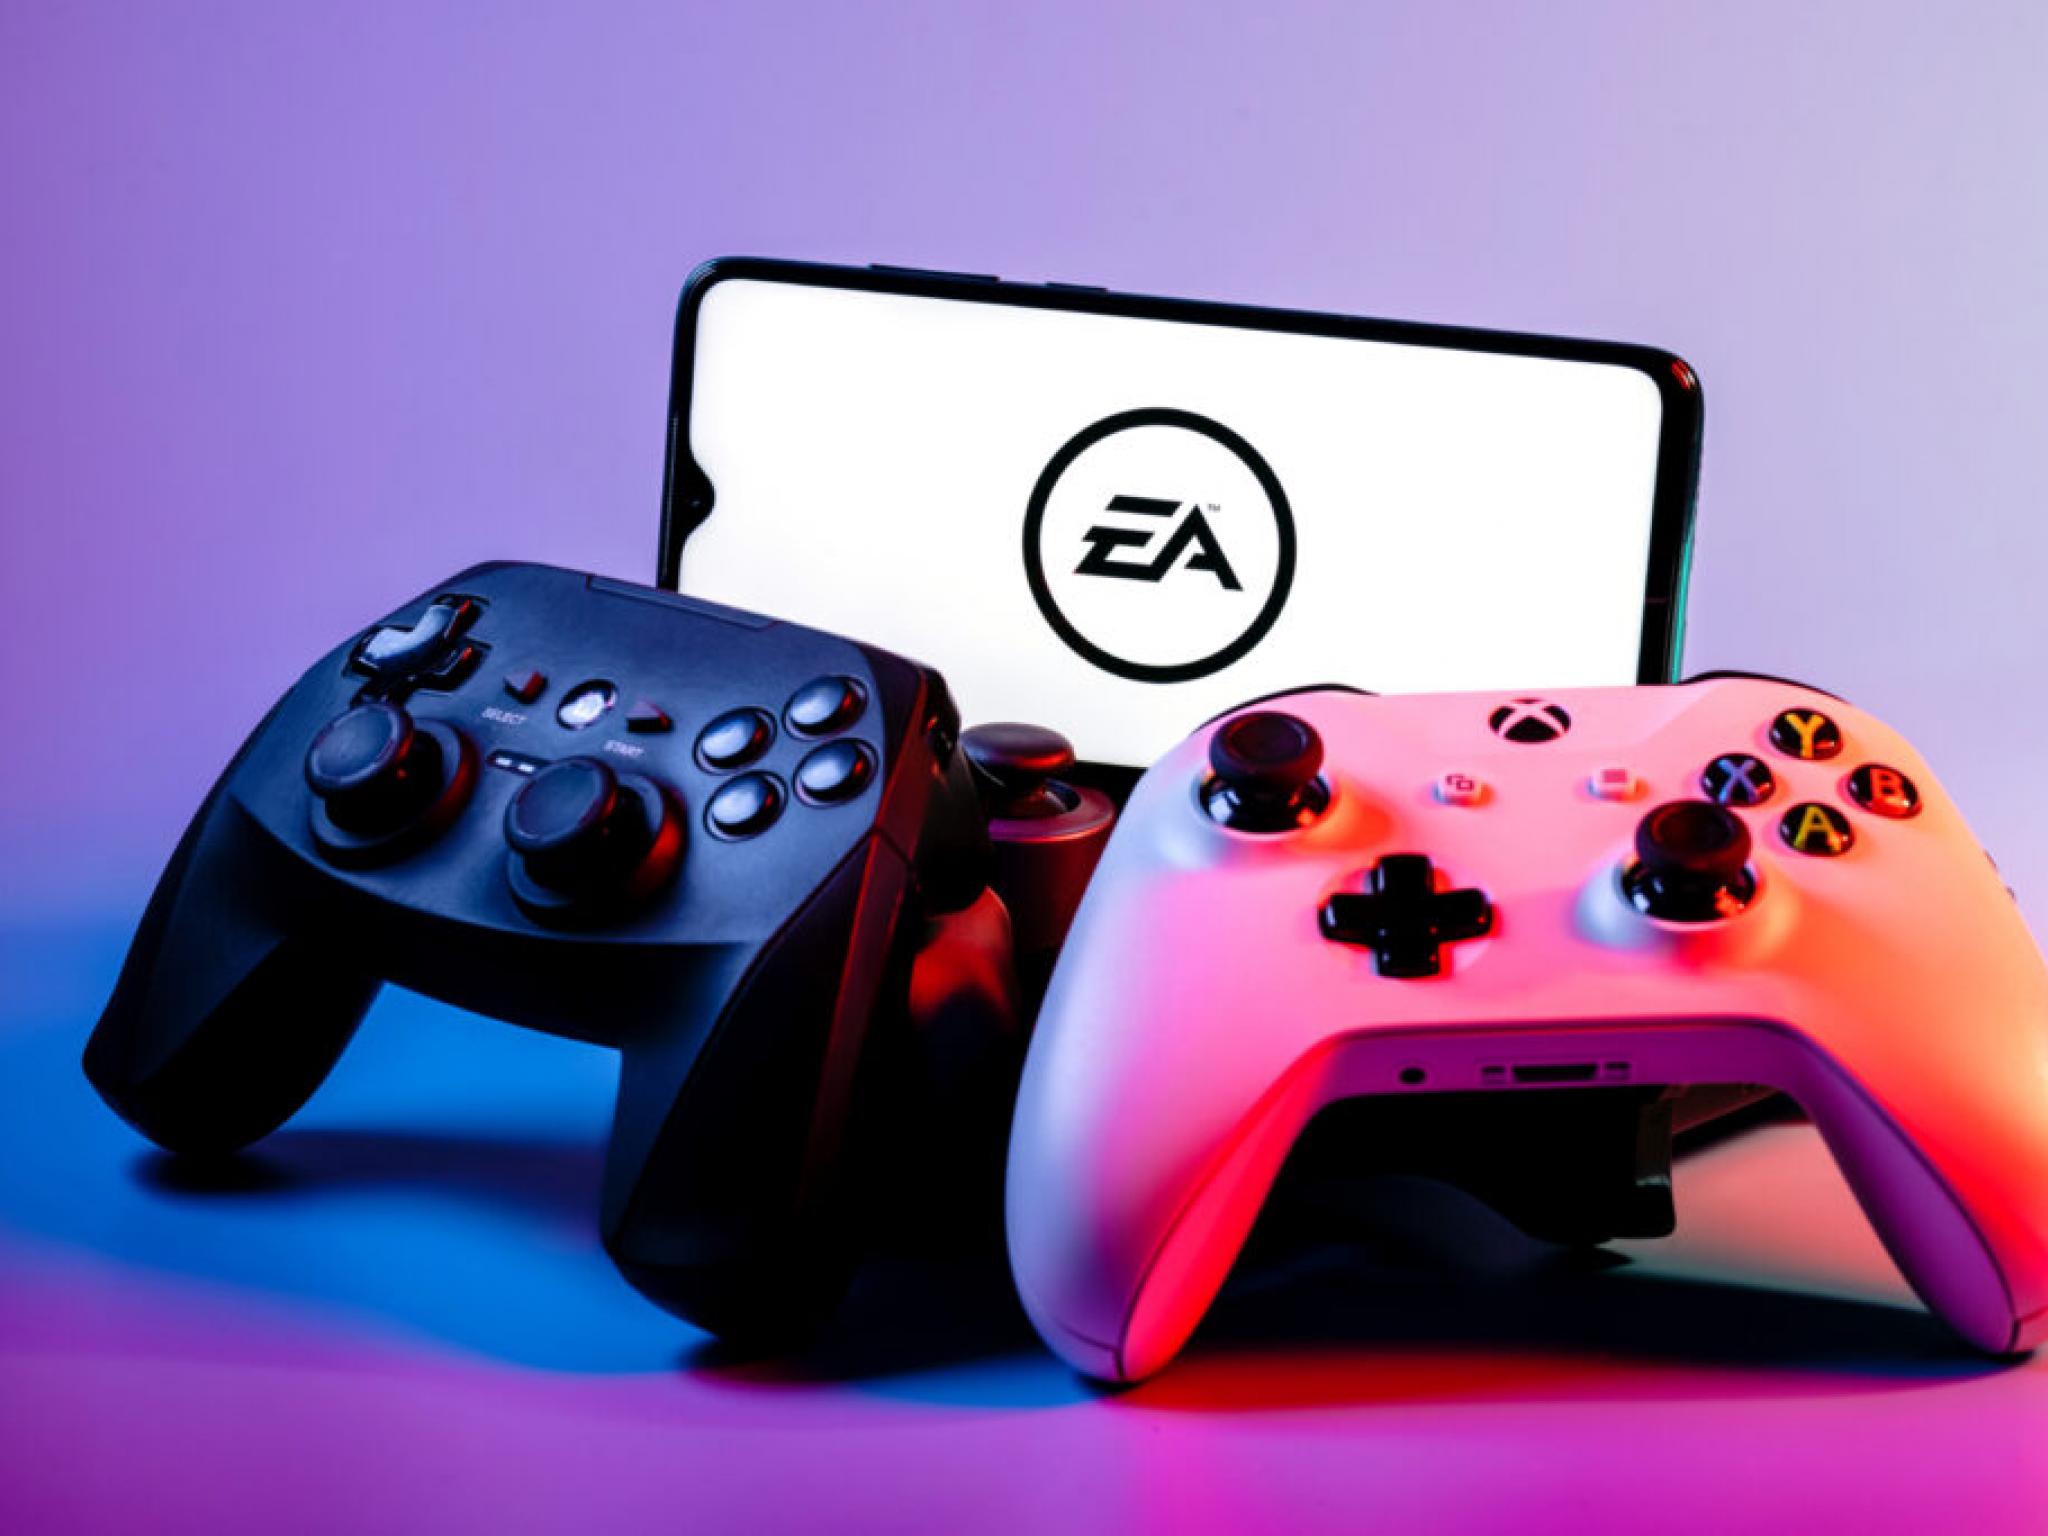  can-electronic-arts-overcome-gaming-headwinds-what-to-expect-from-upcoming-q4-earnings 